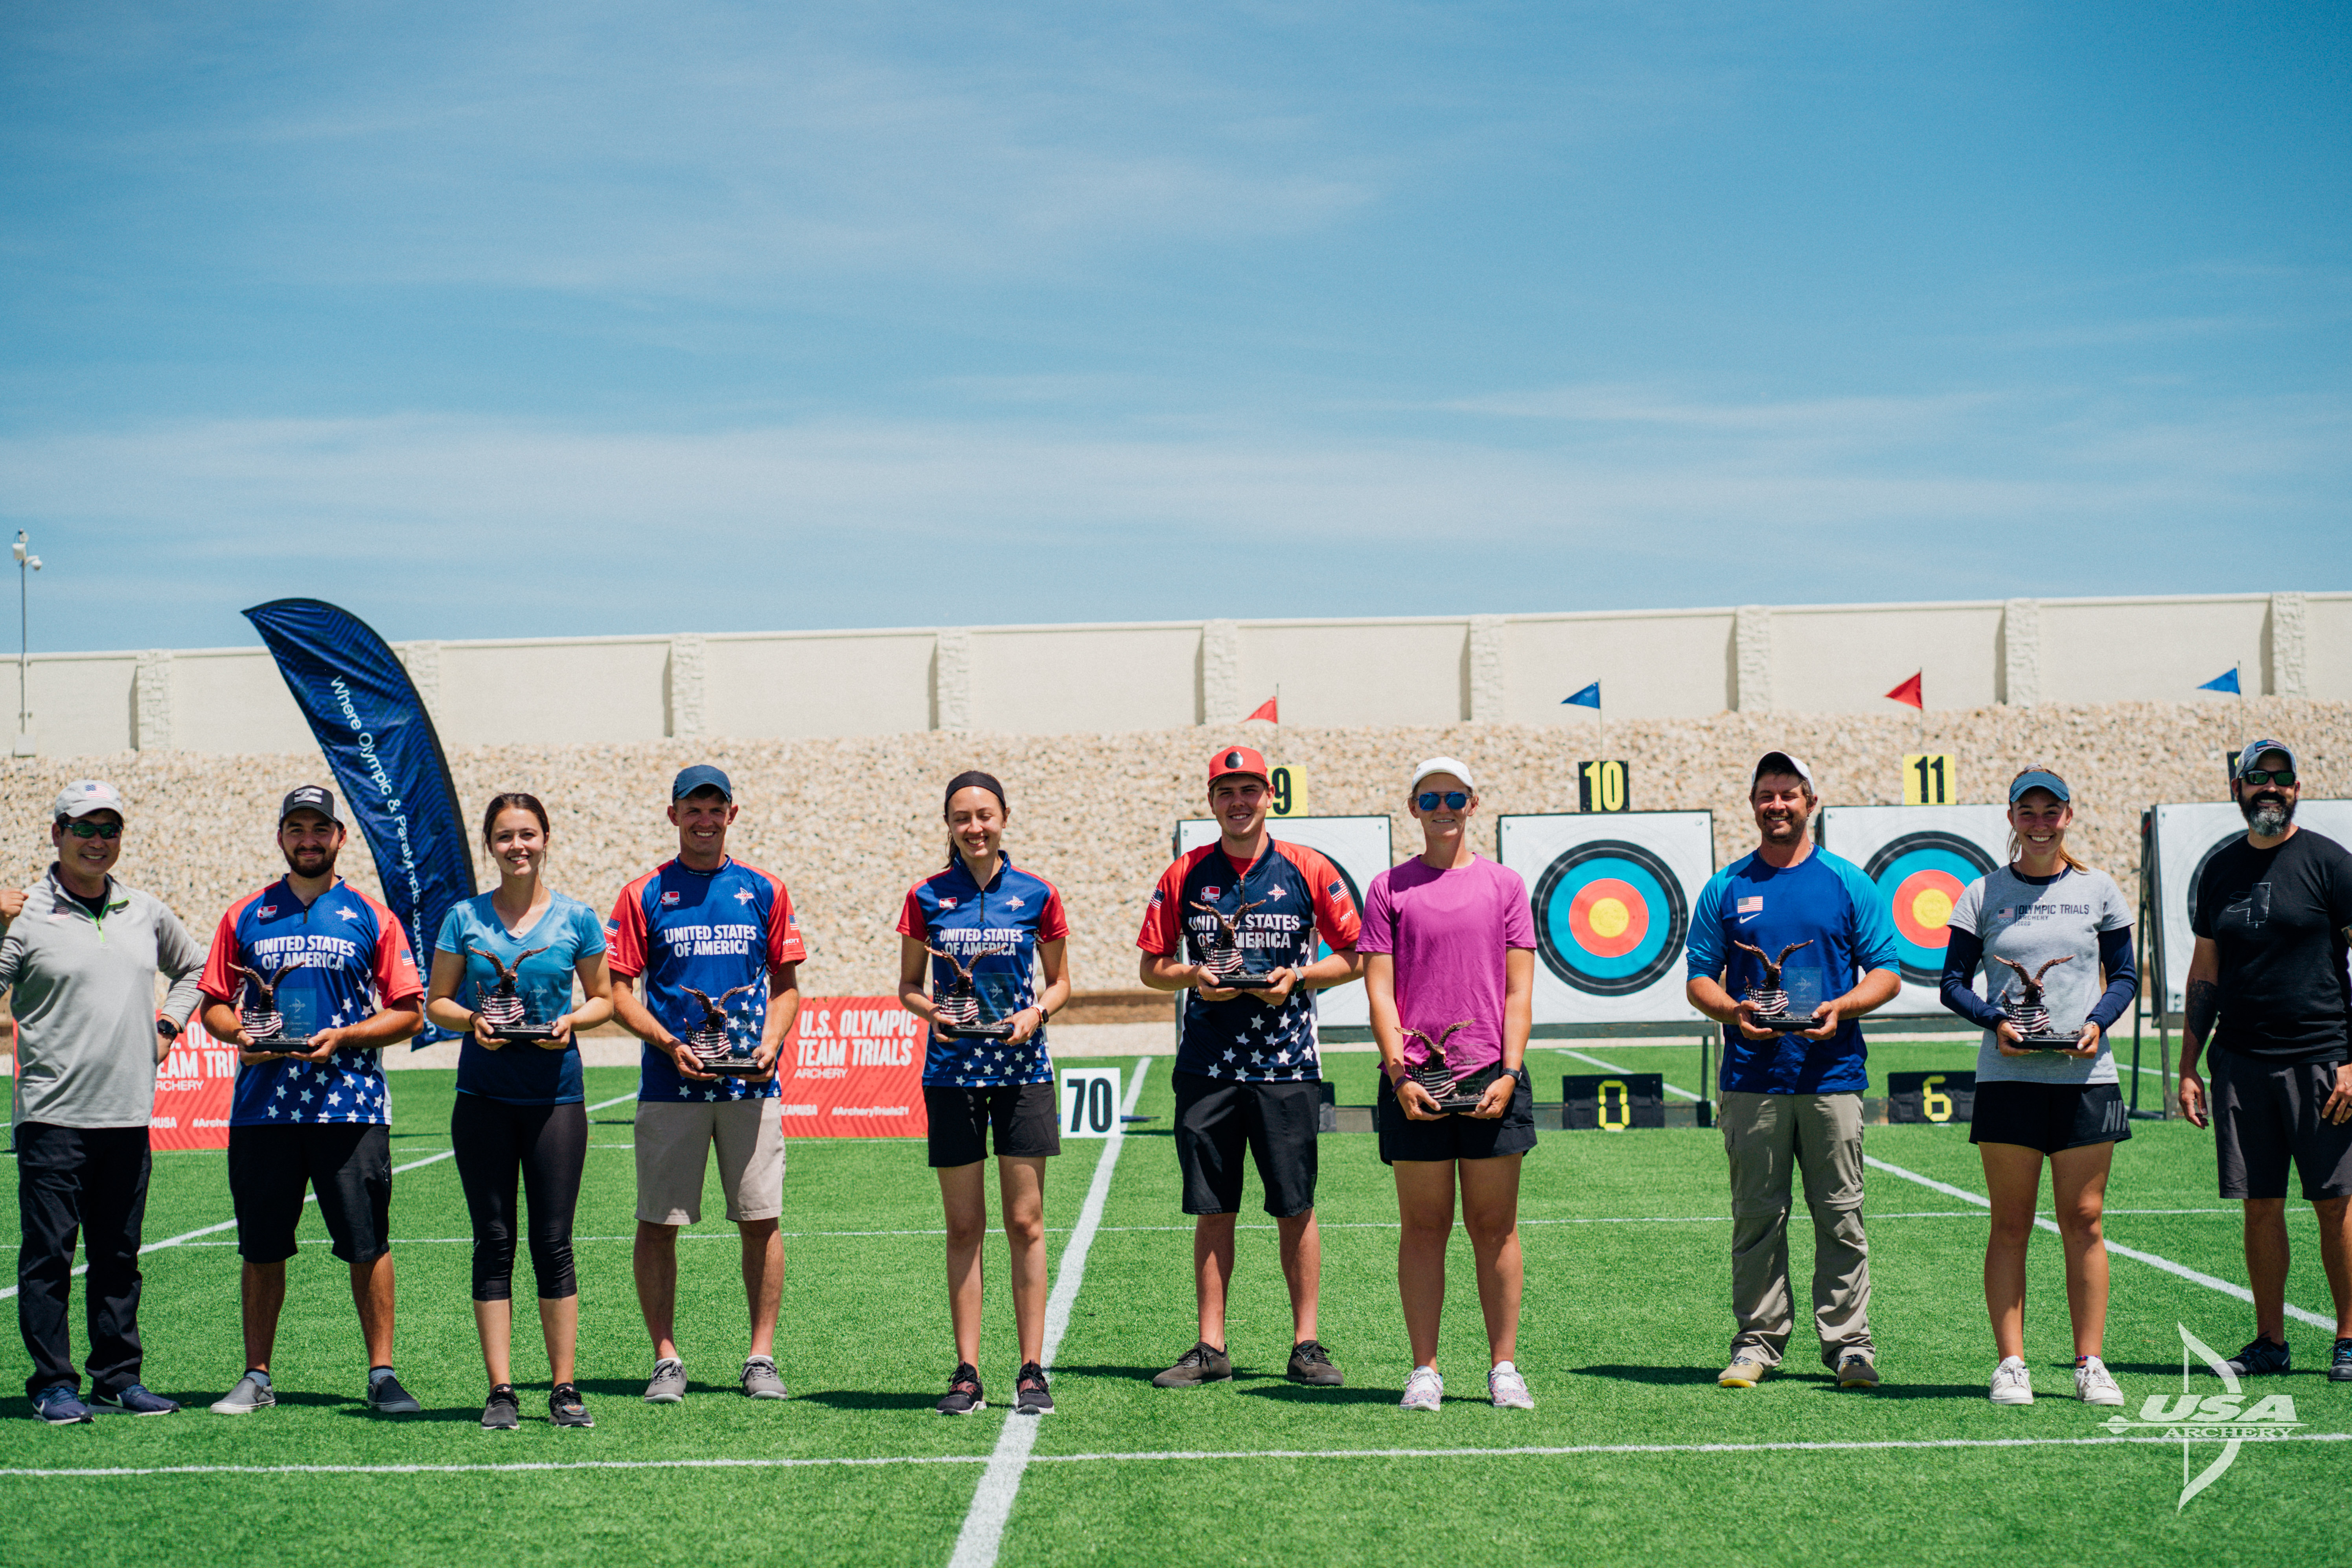 Olympics 2020 archery Official Site